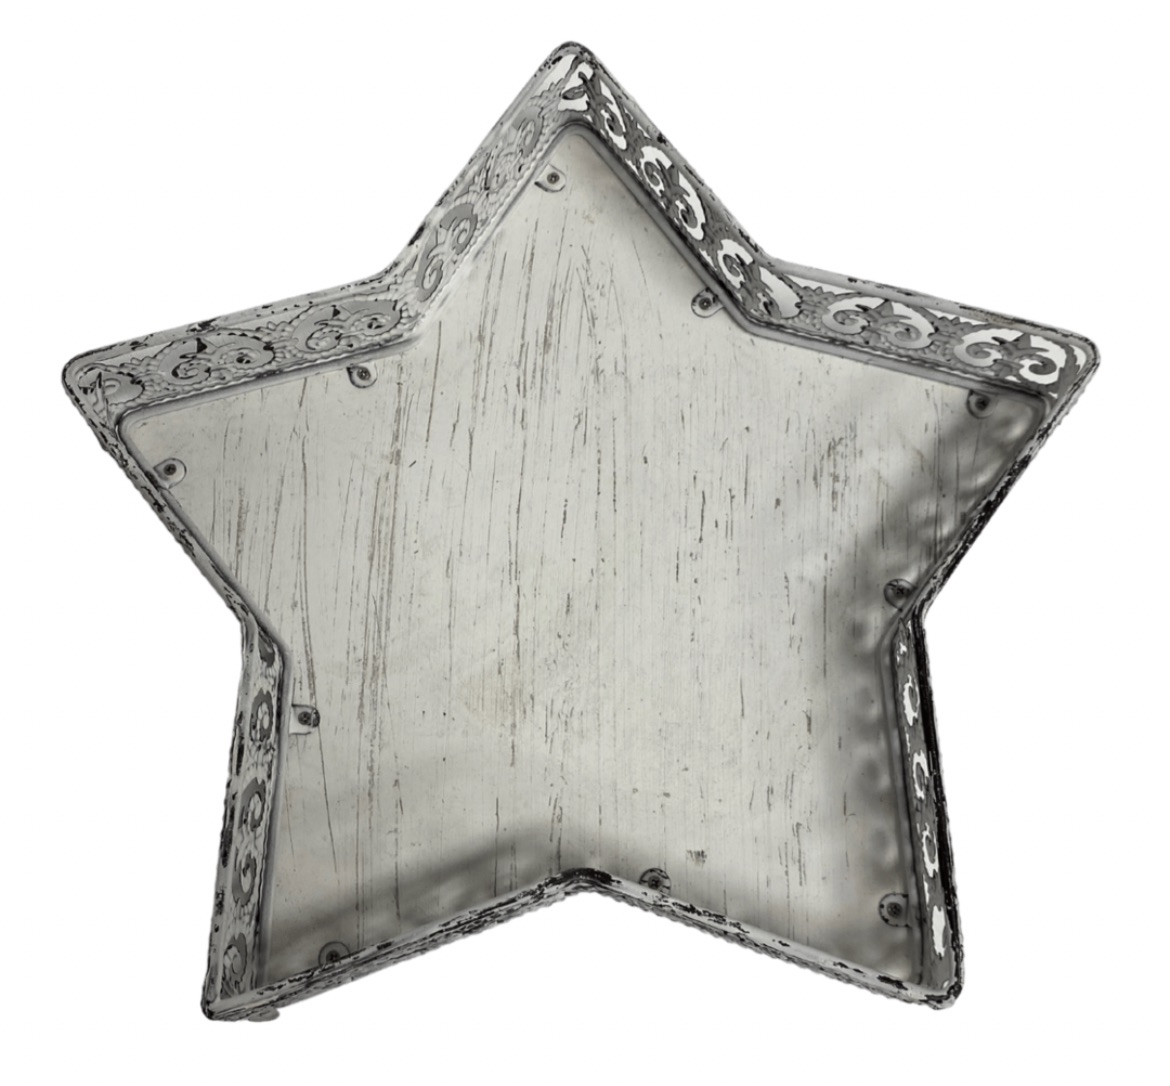 Star Serving Trays - Available in 3 Sizes